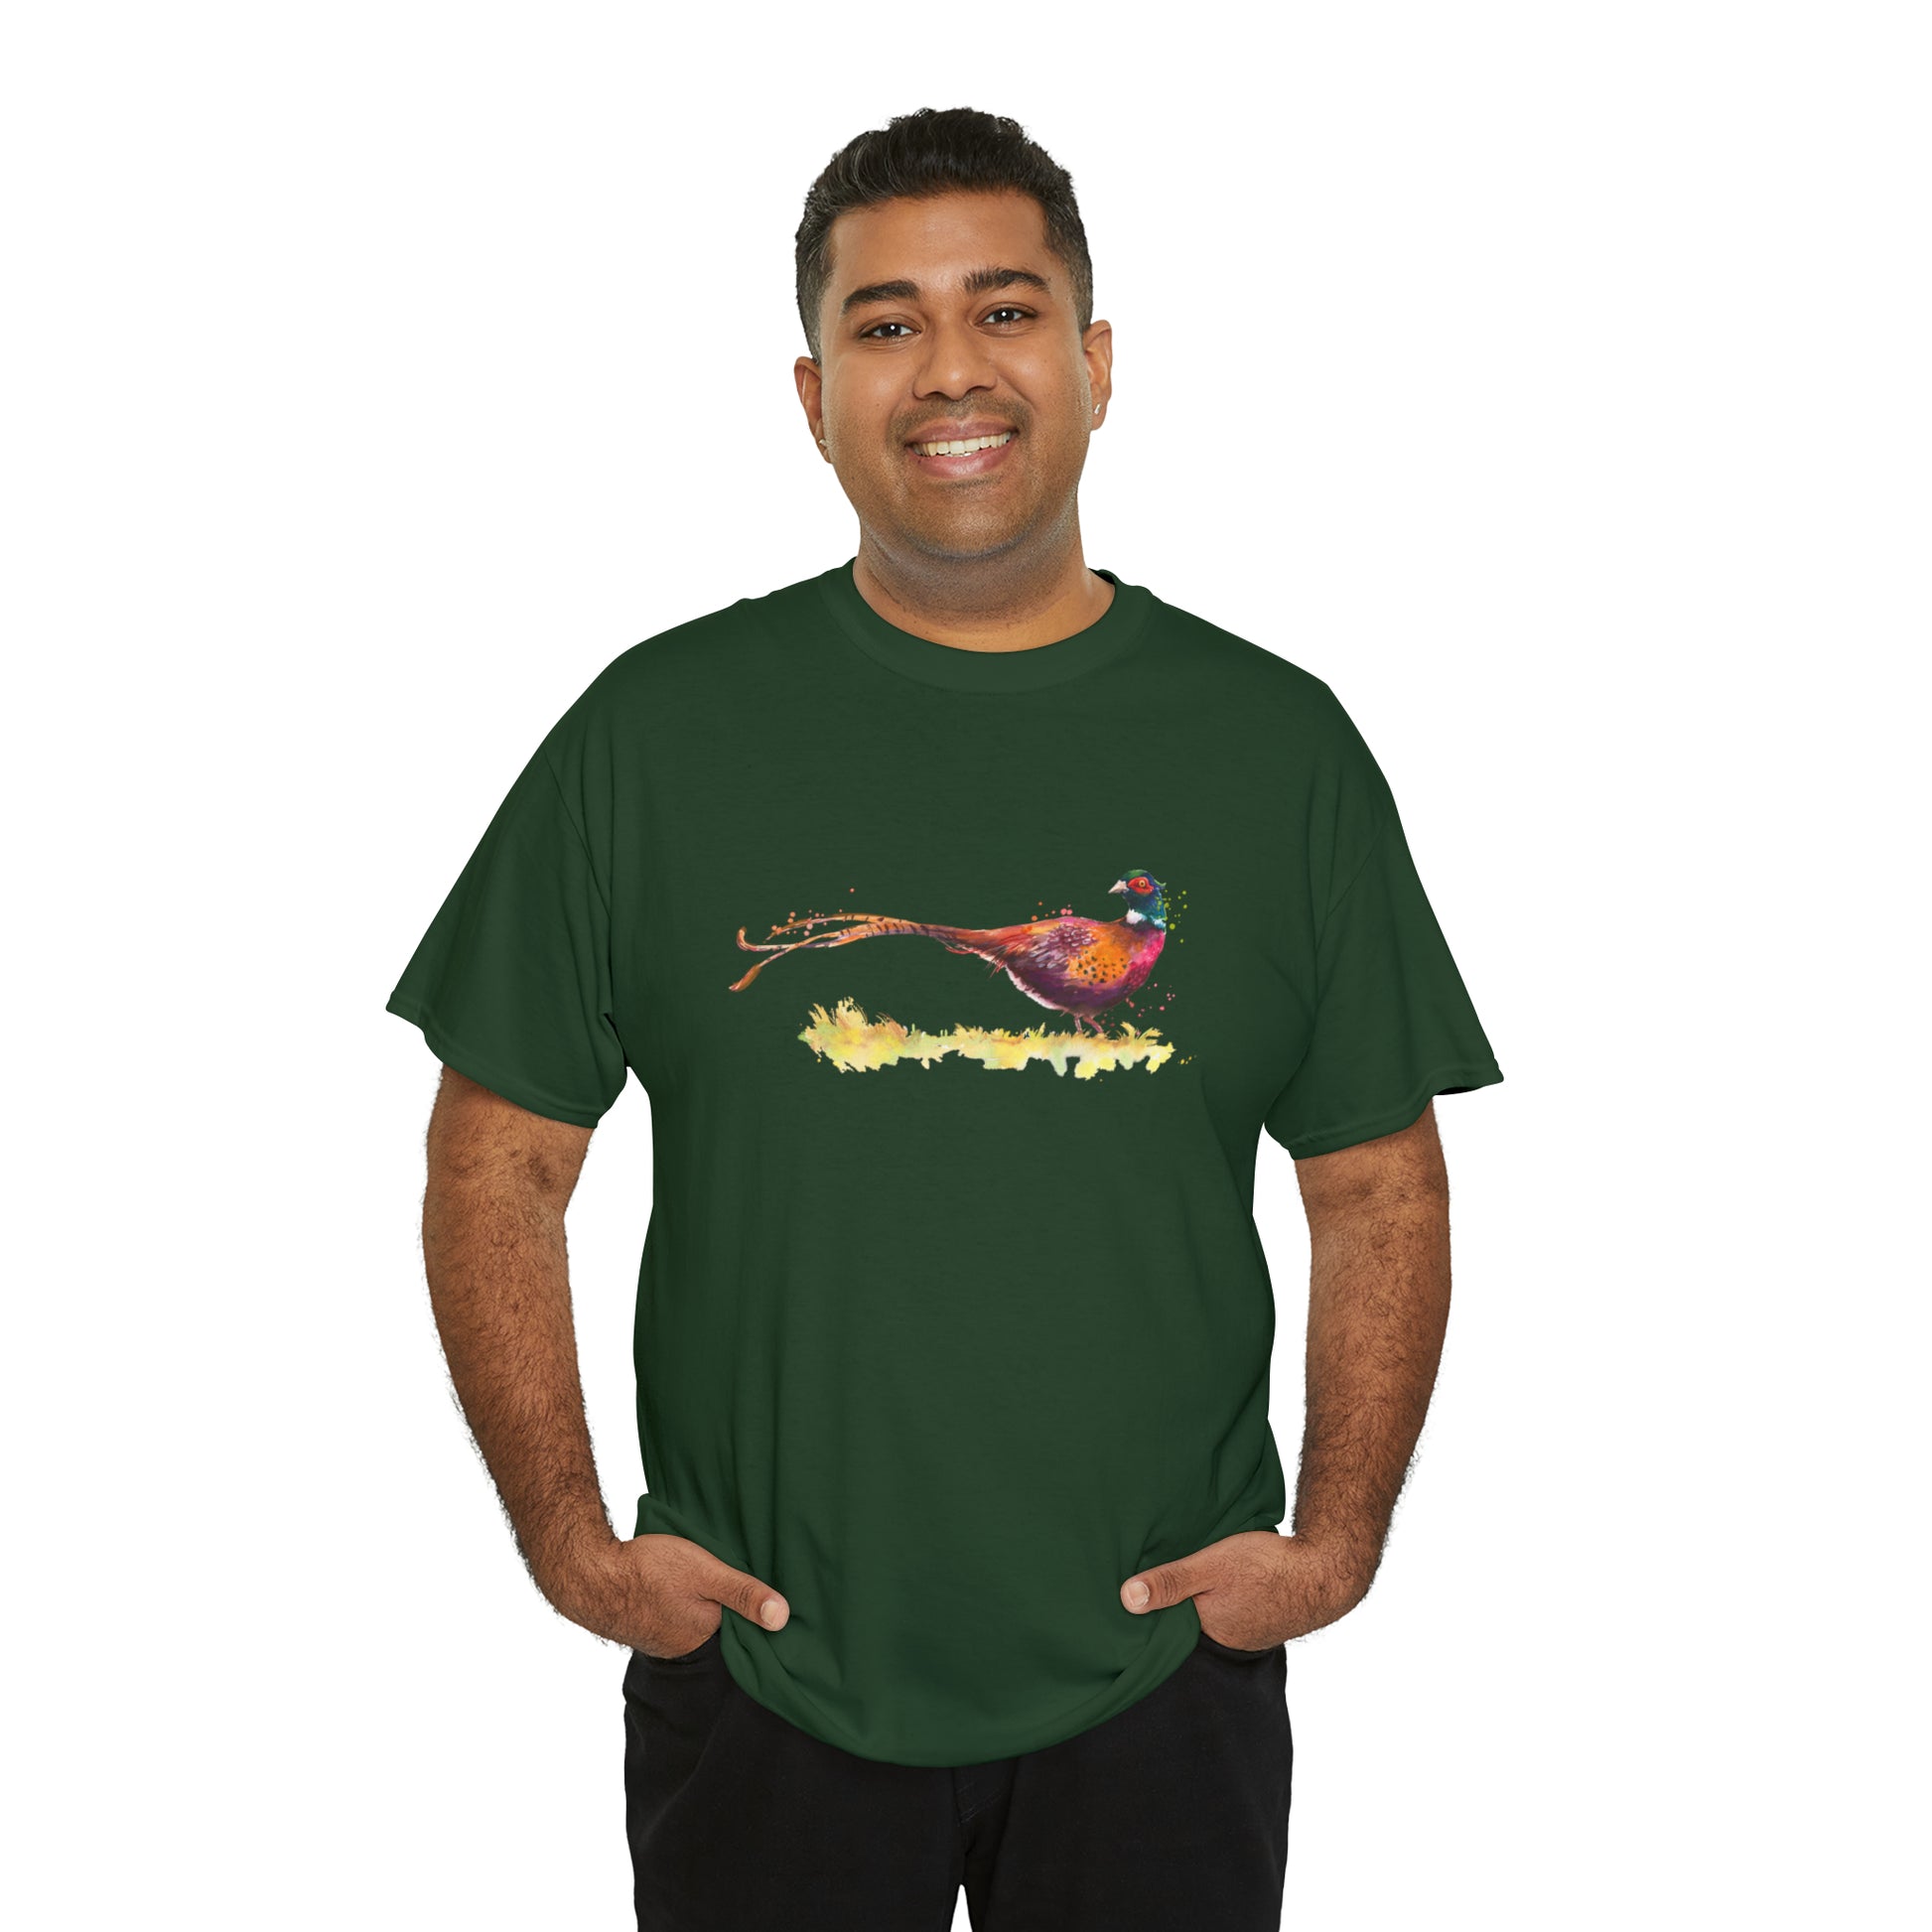 Mock up of a large man wearing the Forest Green shirt